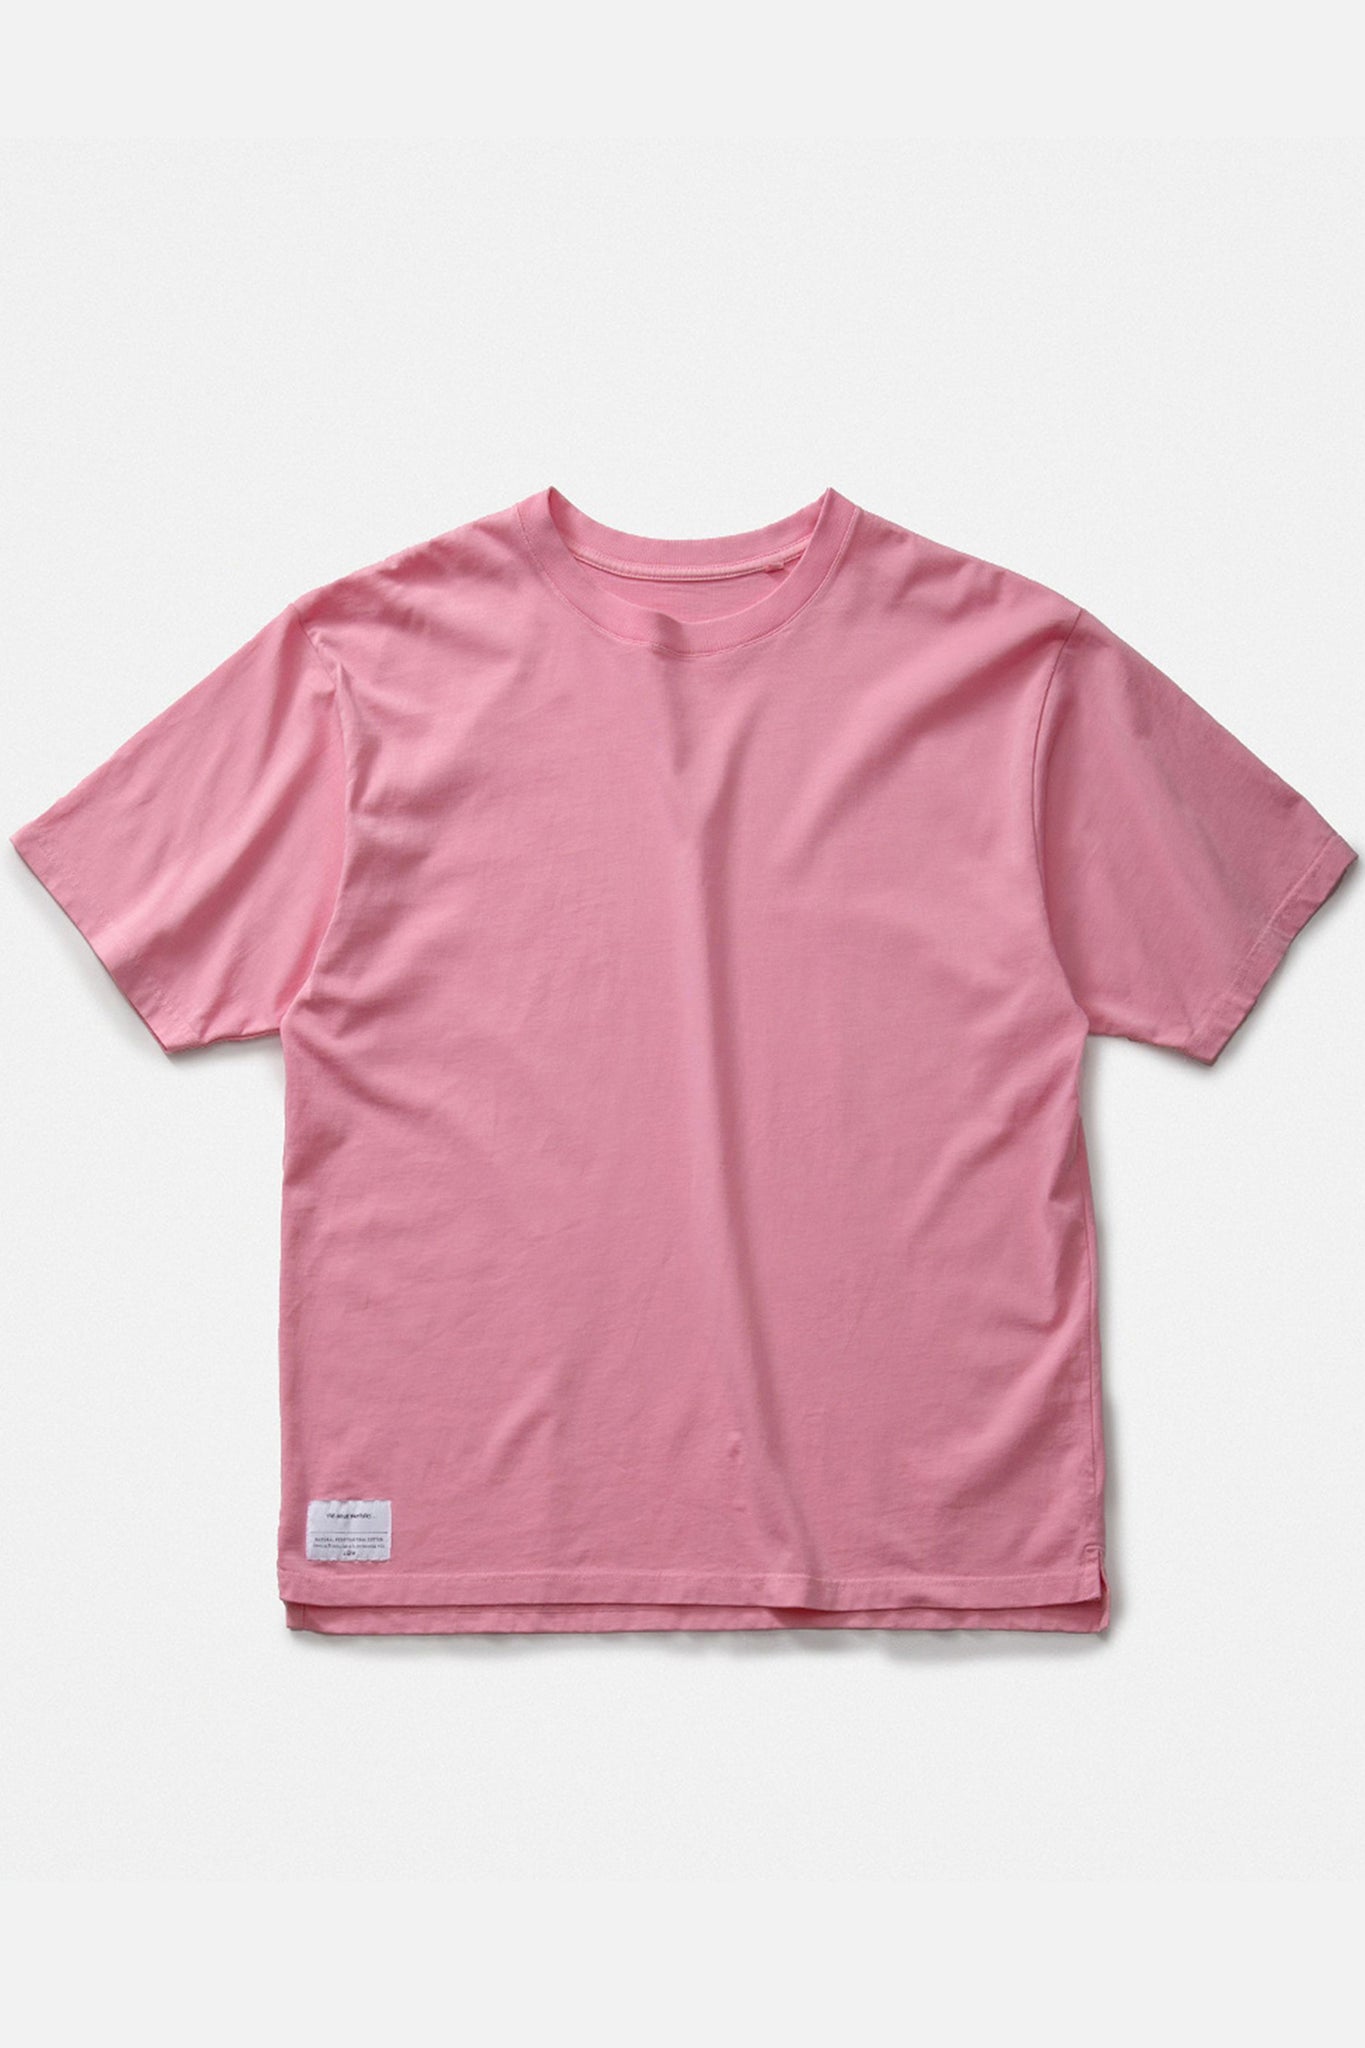 THE INOUE BROTHERS... "SINGLE JERSEY BOX T-SHIRT / PINK"